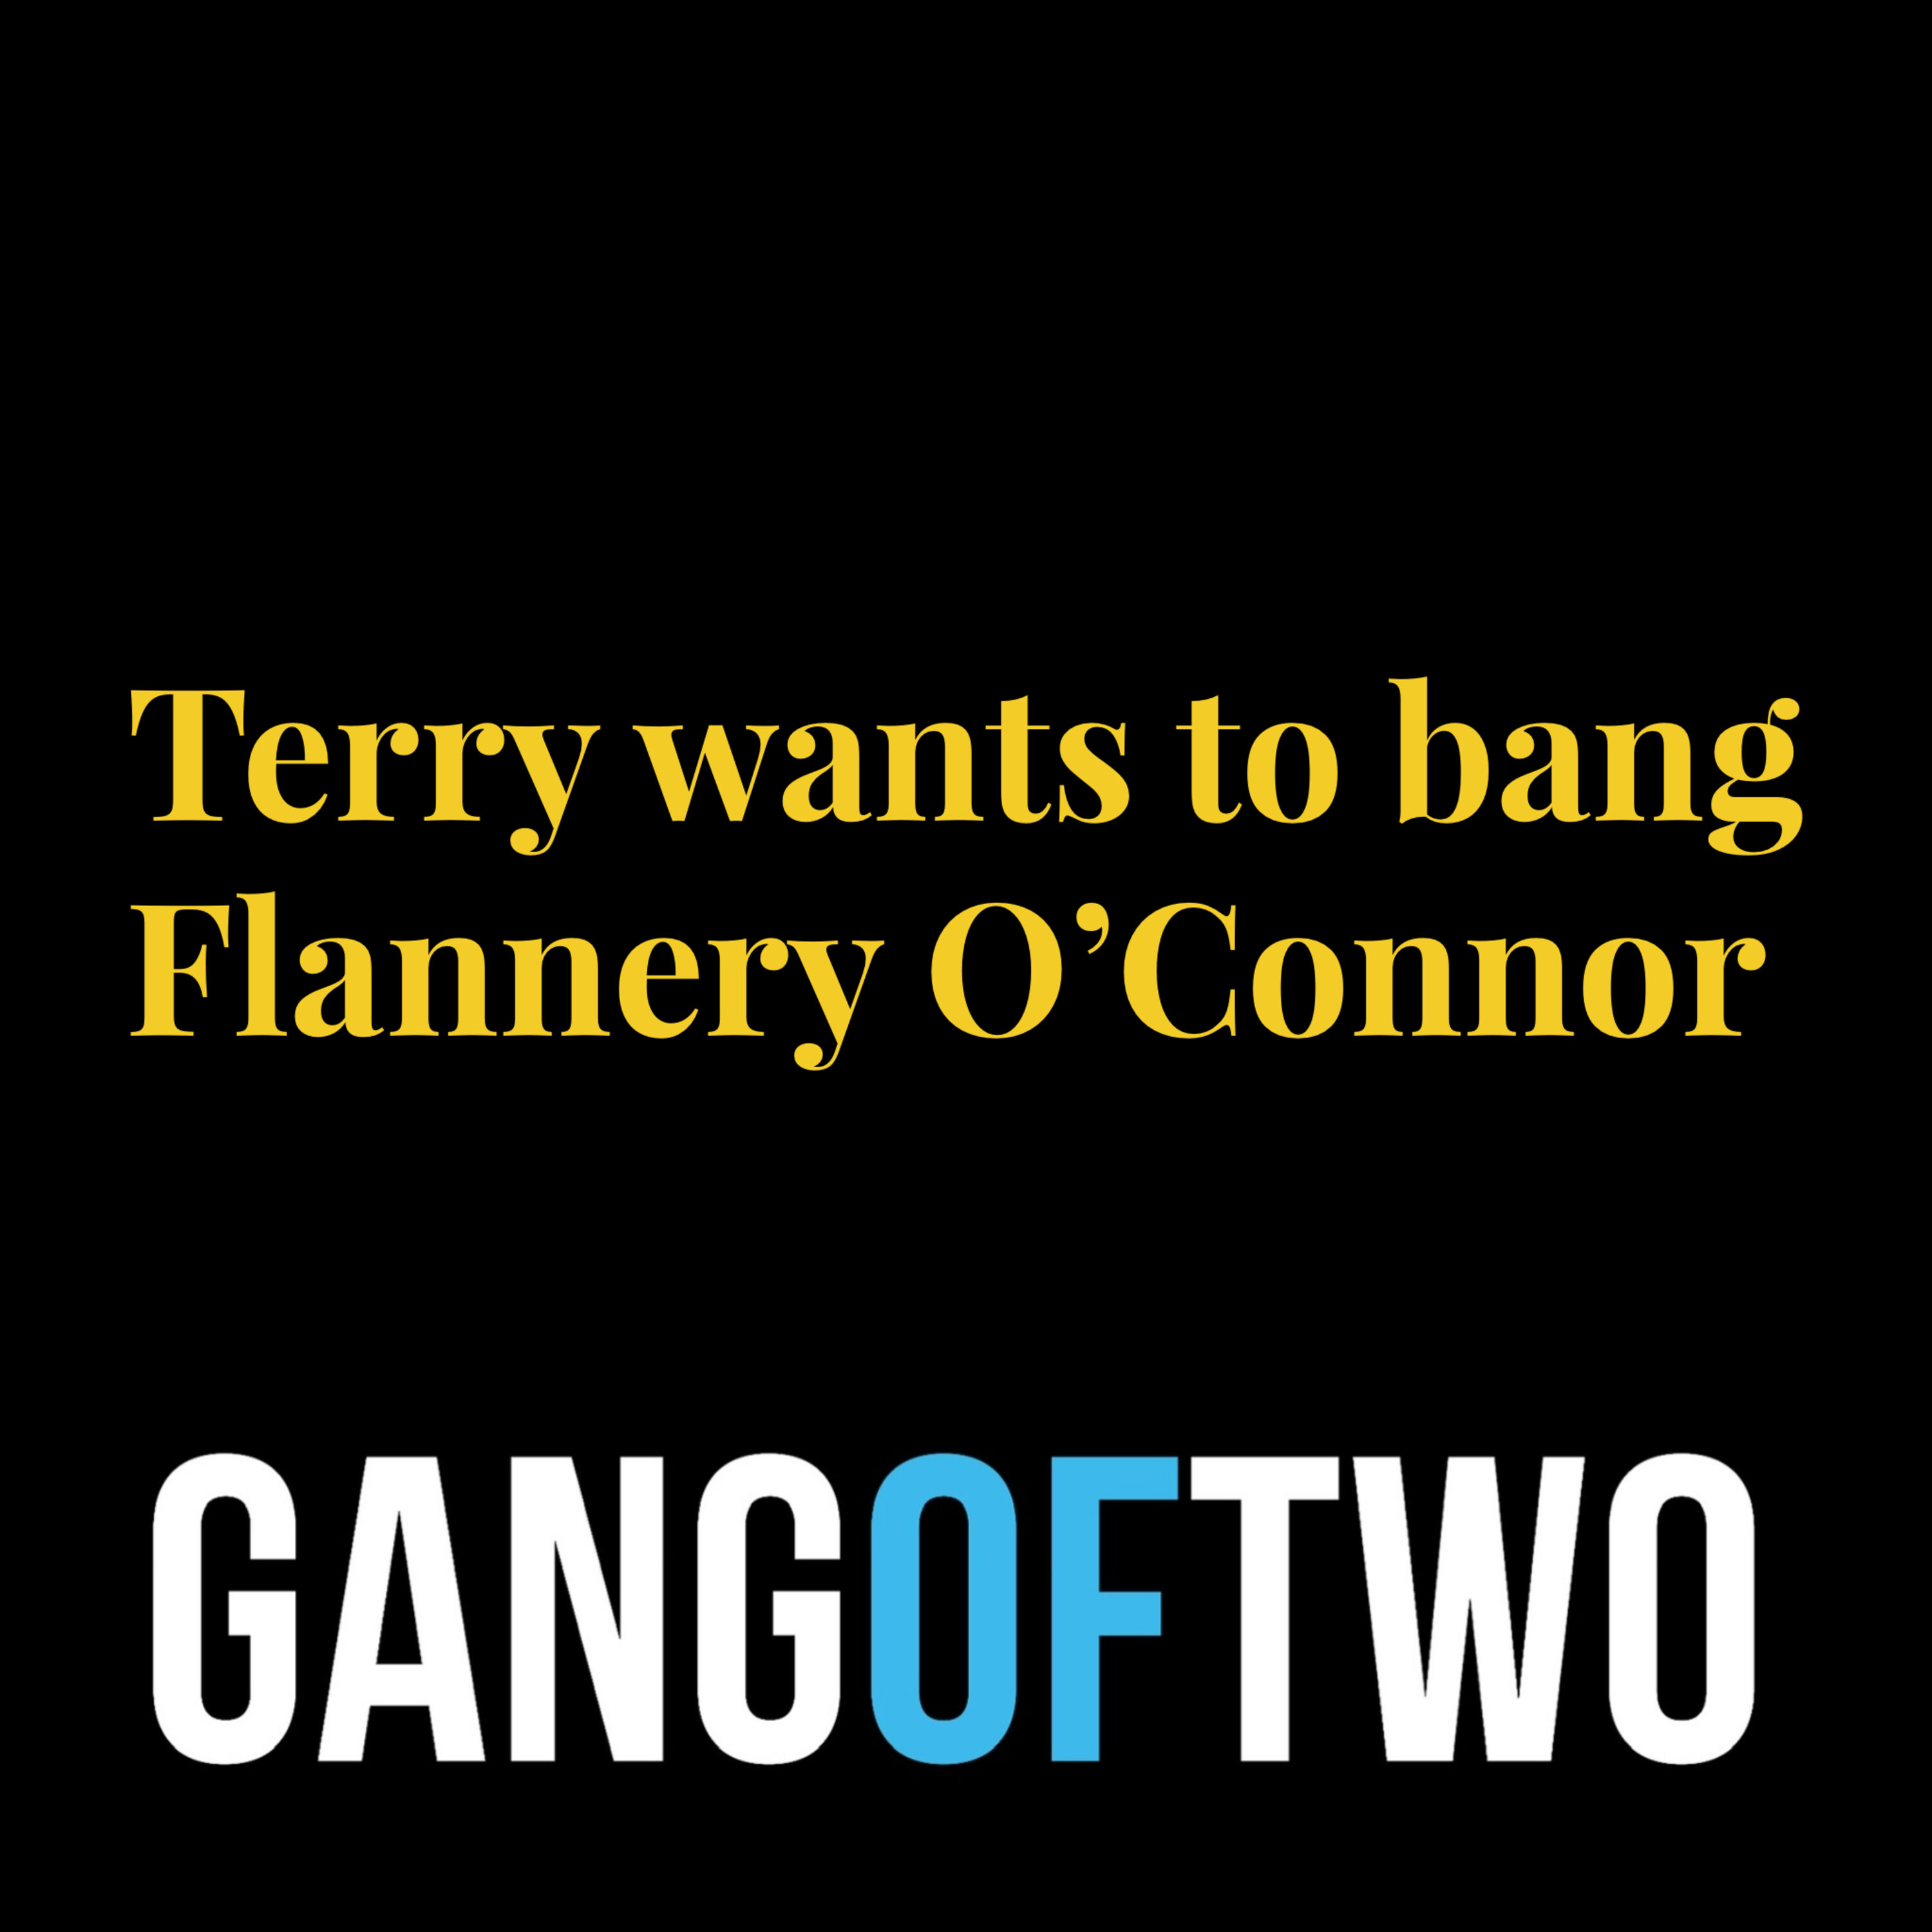 TERRY WANTS TO BANG FLANNERY O'CONNOR Image